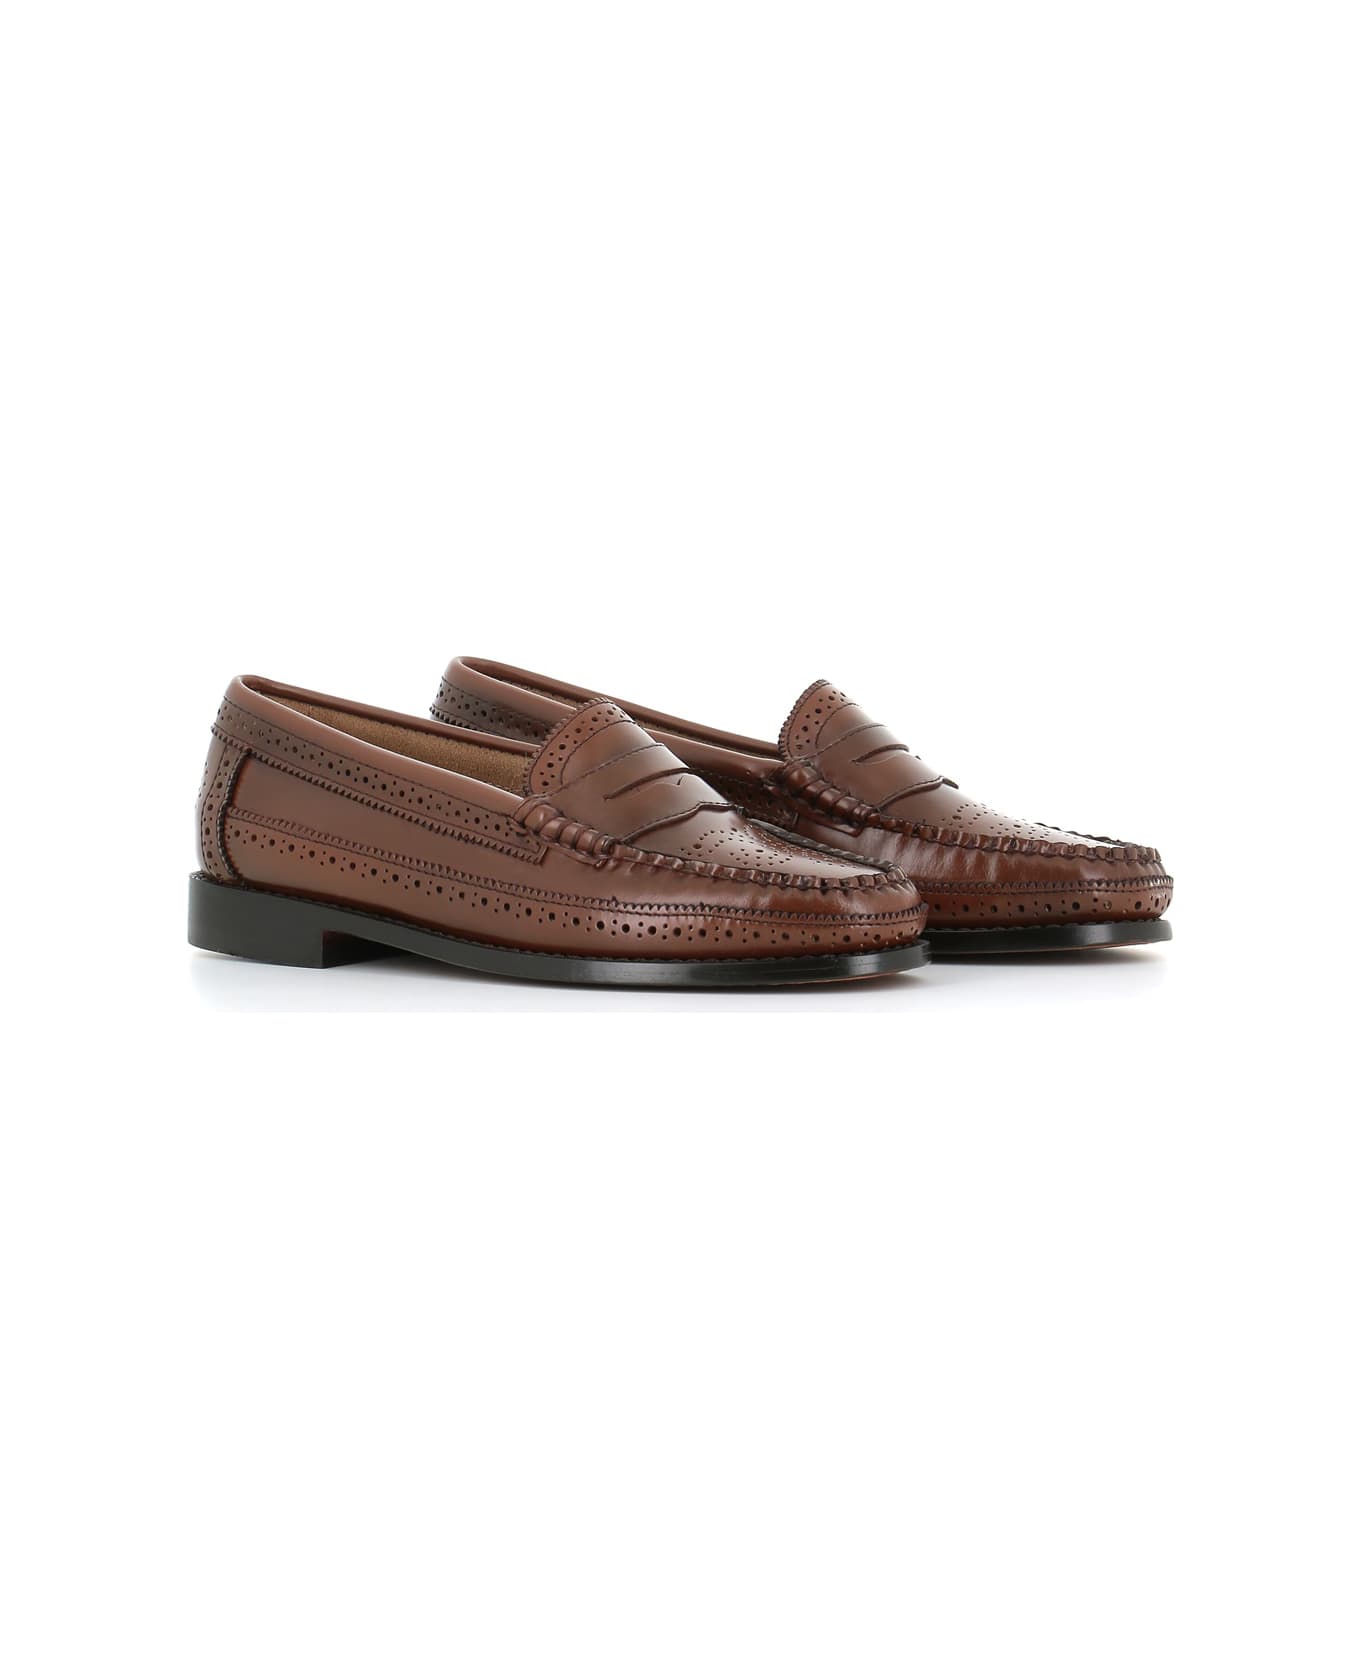 G.H.Bass & Co. Penny Brogues Loafer - Cognac